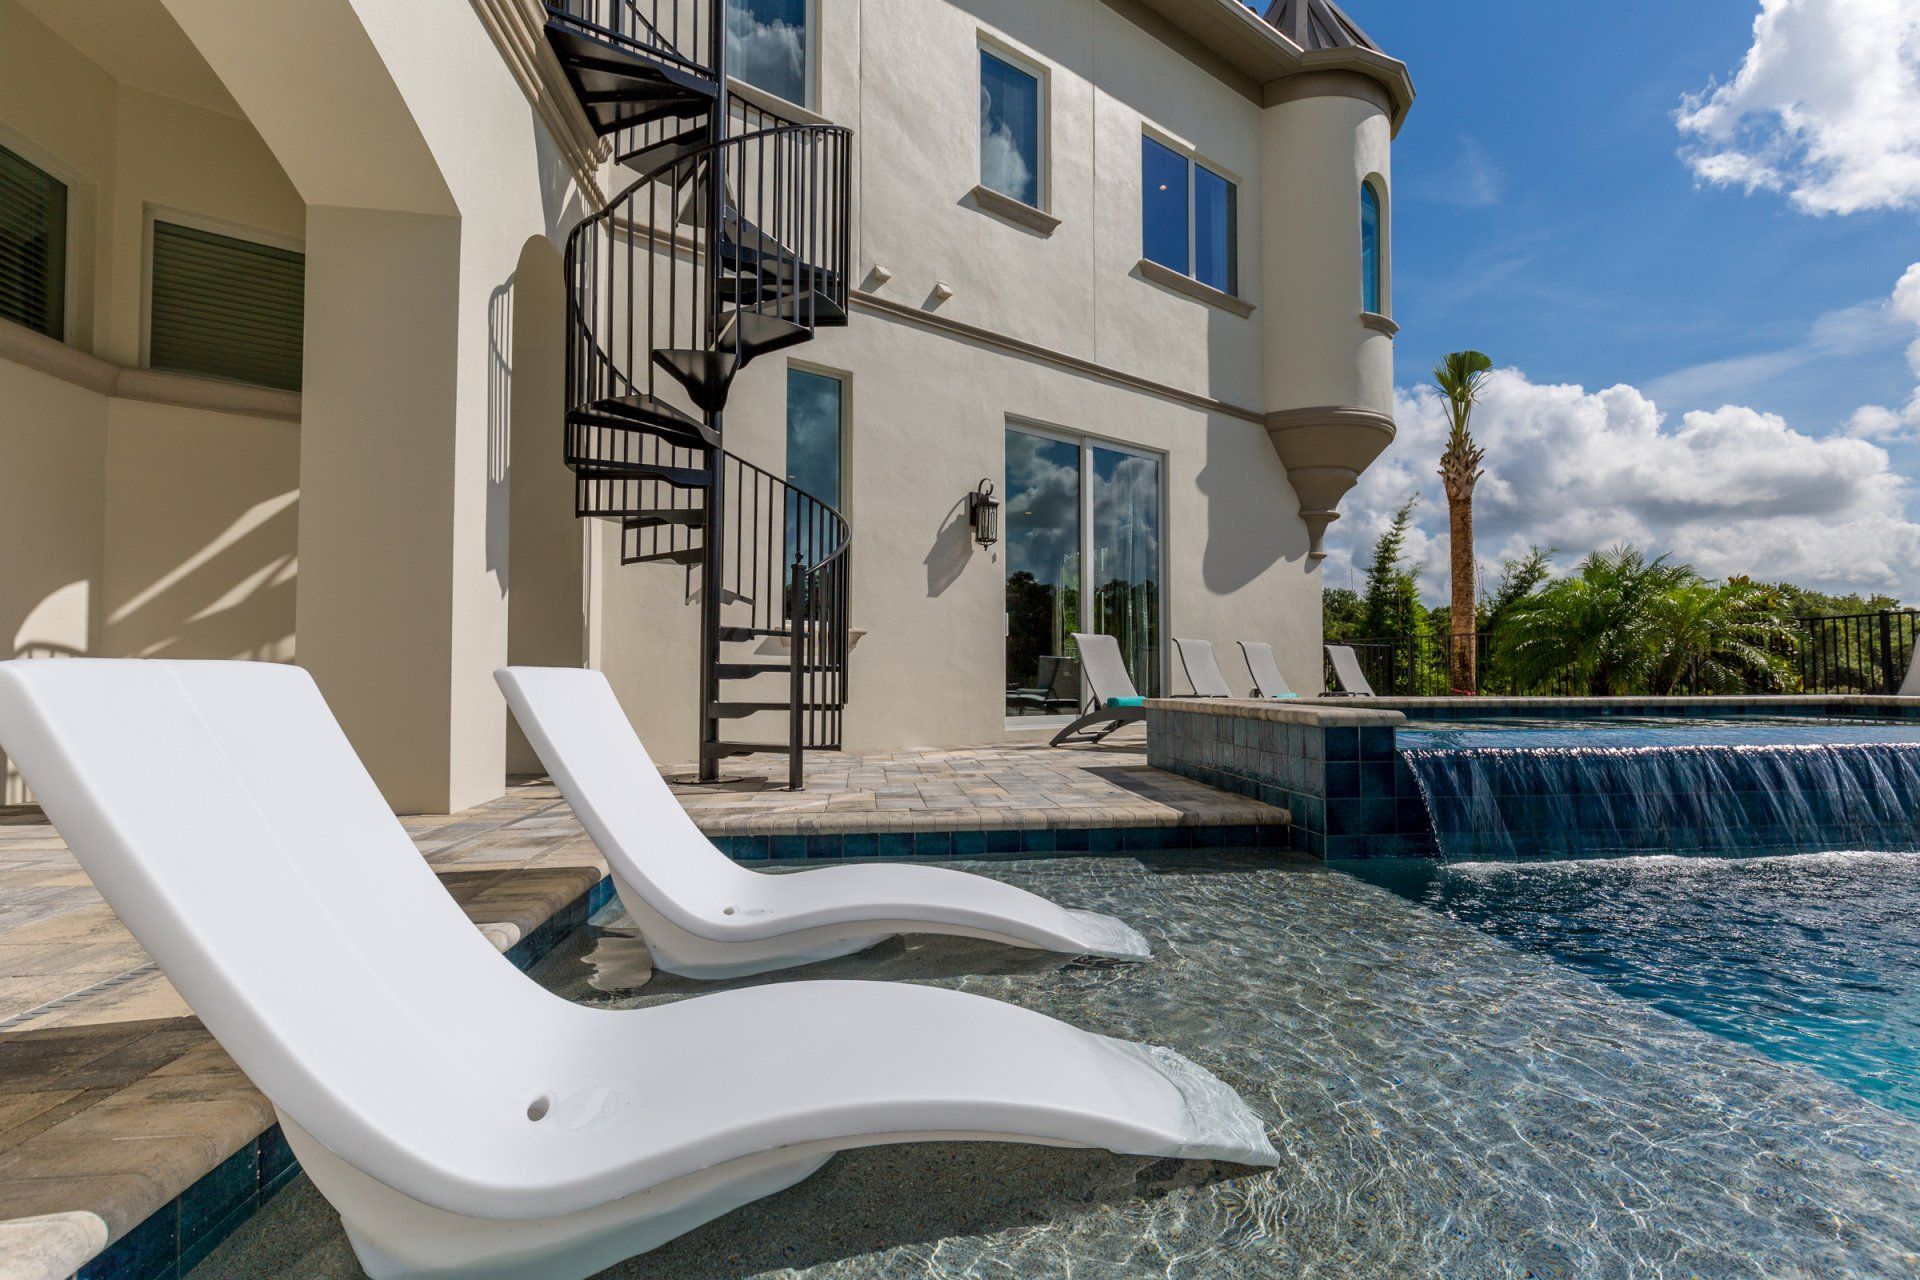 two white lounge chairs are sitting next to a swimming pool in front of a house with a spiral staircase